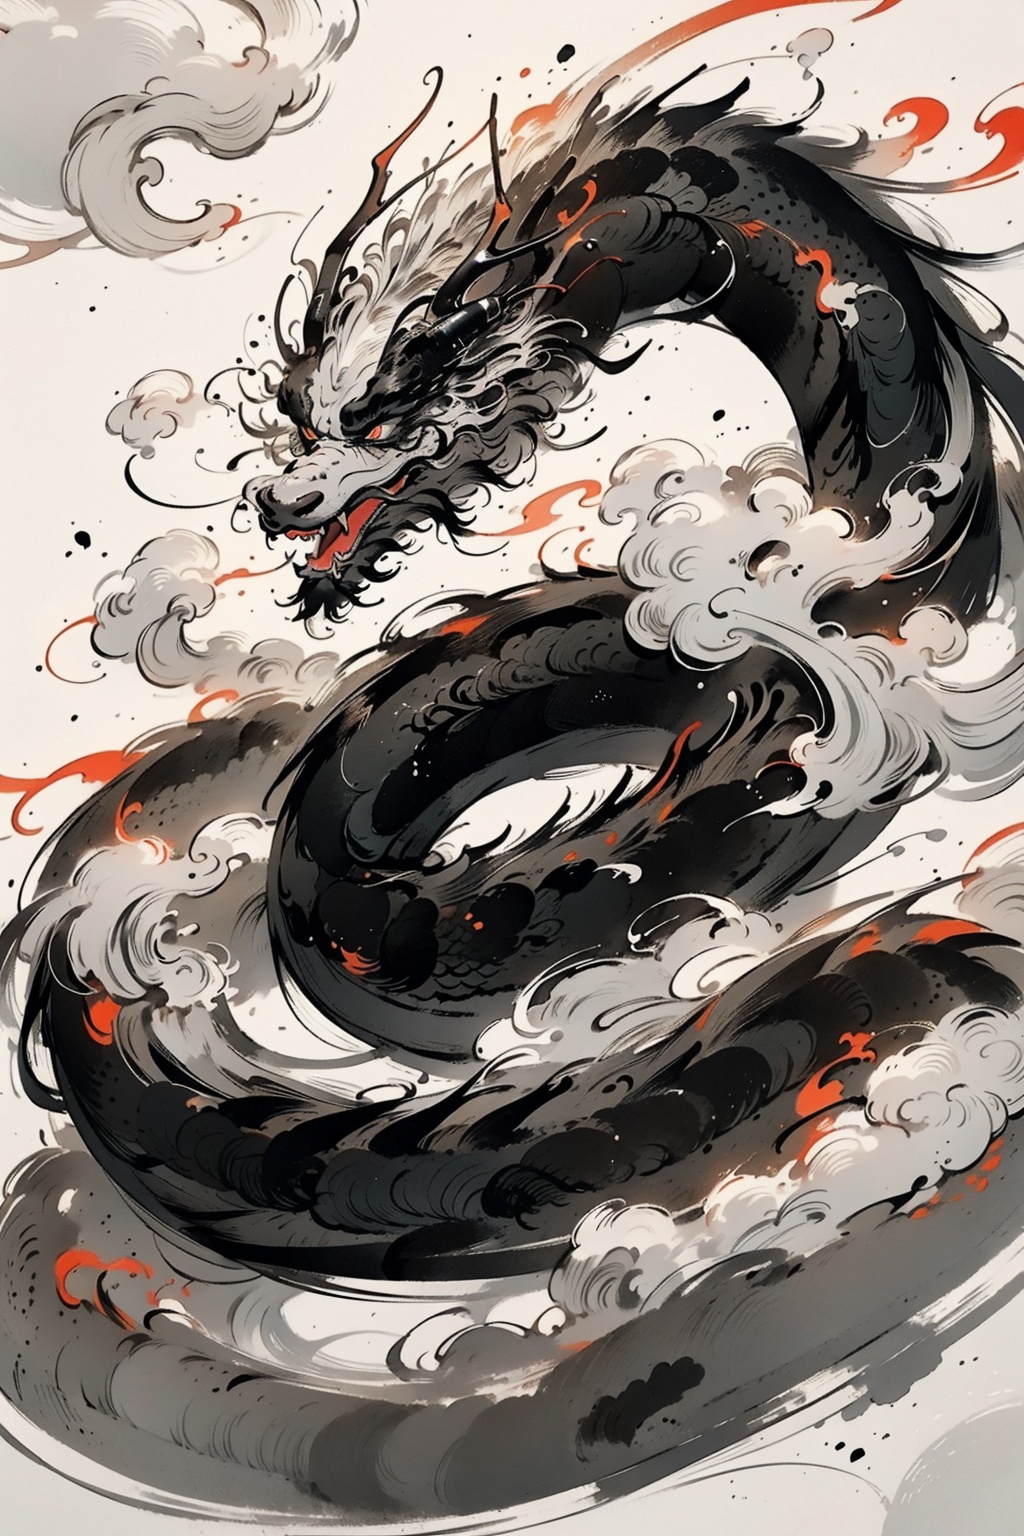  Chinese dragon, imagination, traditional Chinese painting, ancient painting, ink and wash style, cloud around, fire cloud, light black dragon, black gold color matching, fangs, mouth opening, fierceness, cloud around and flame.Pure white background